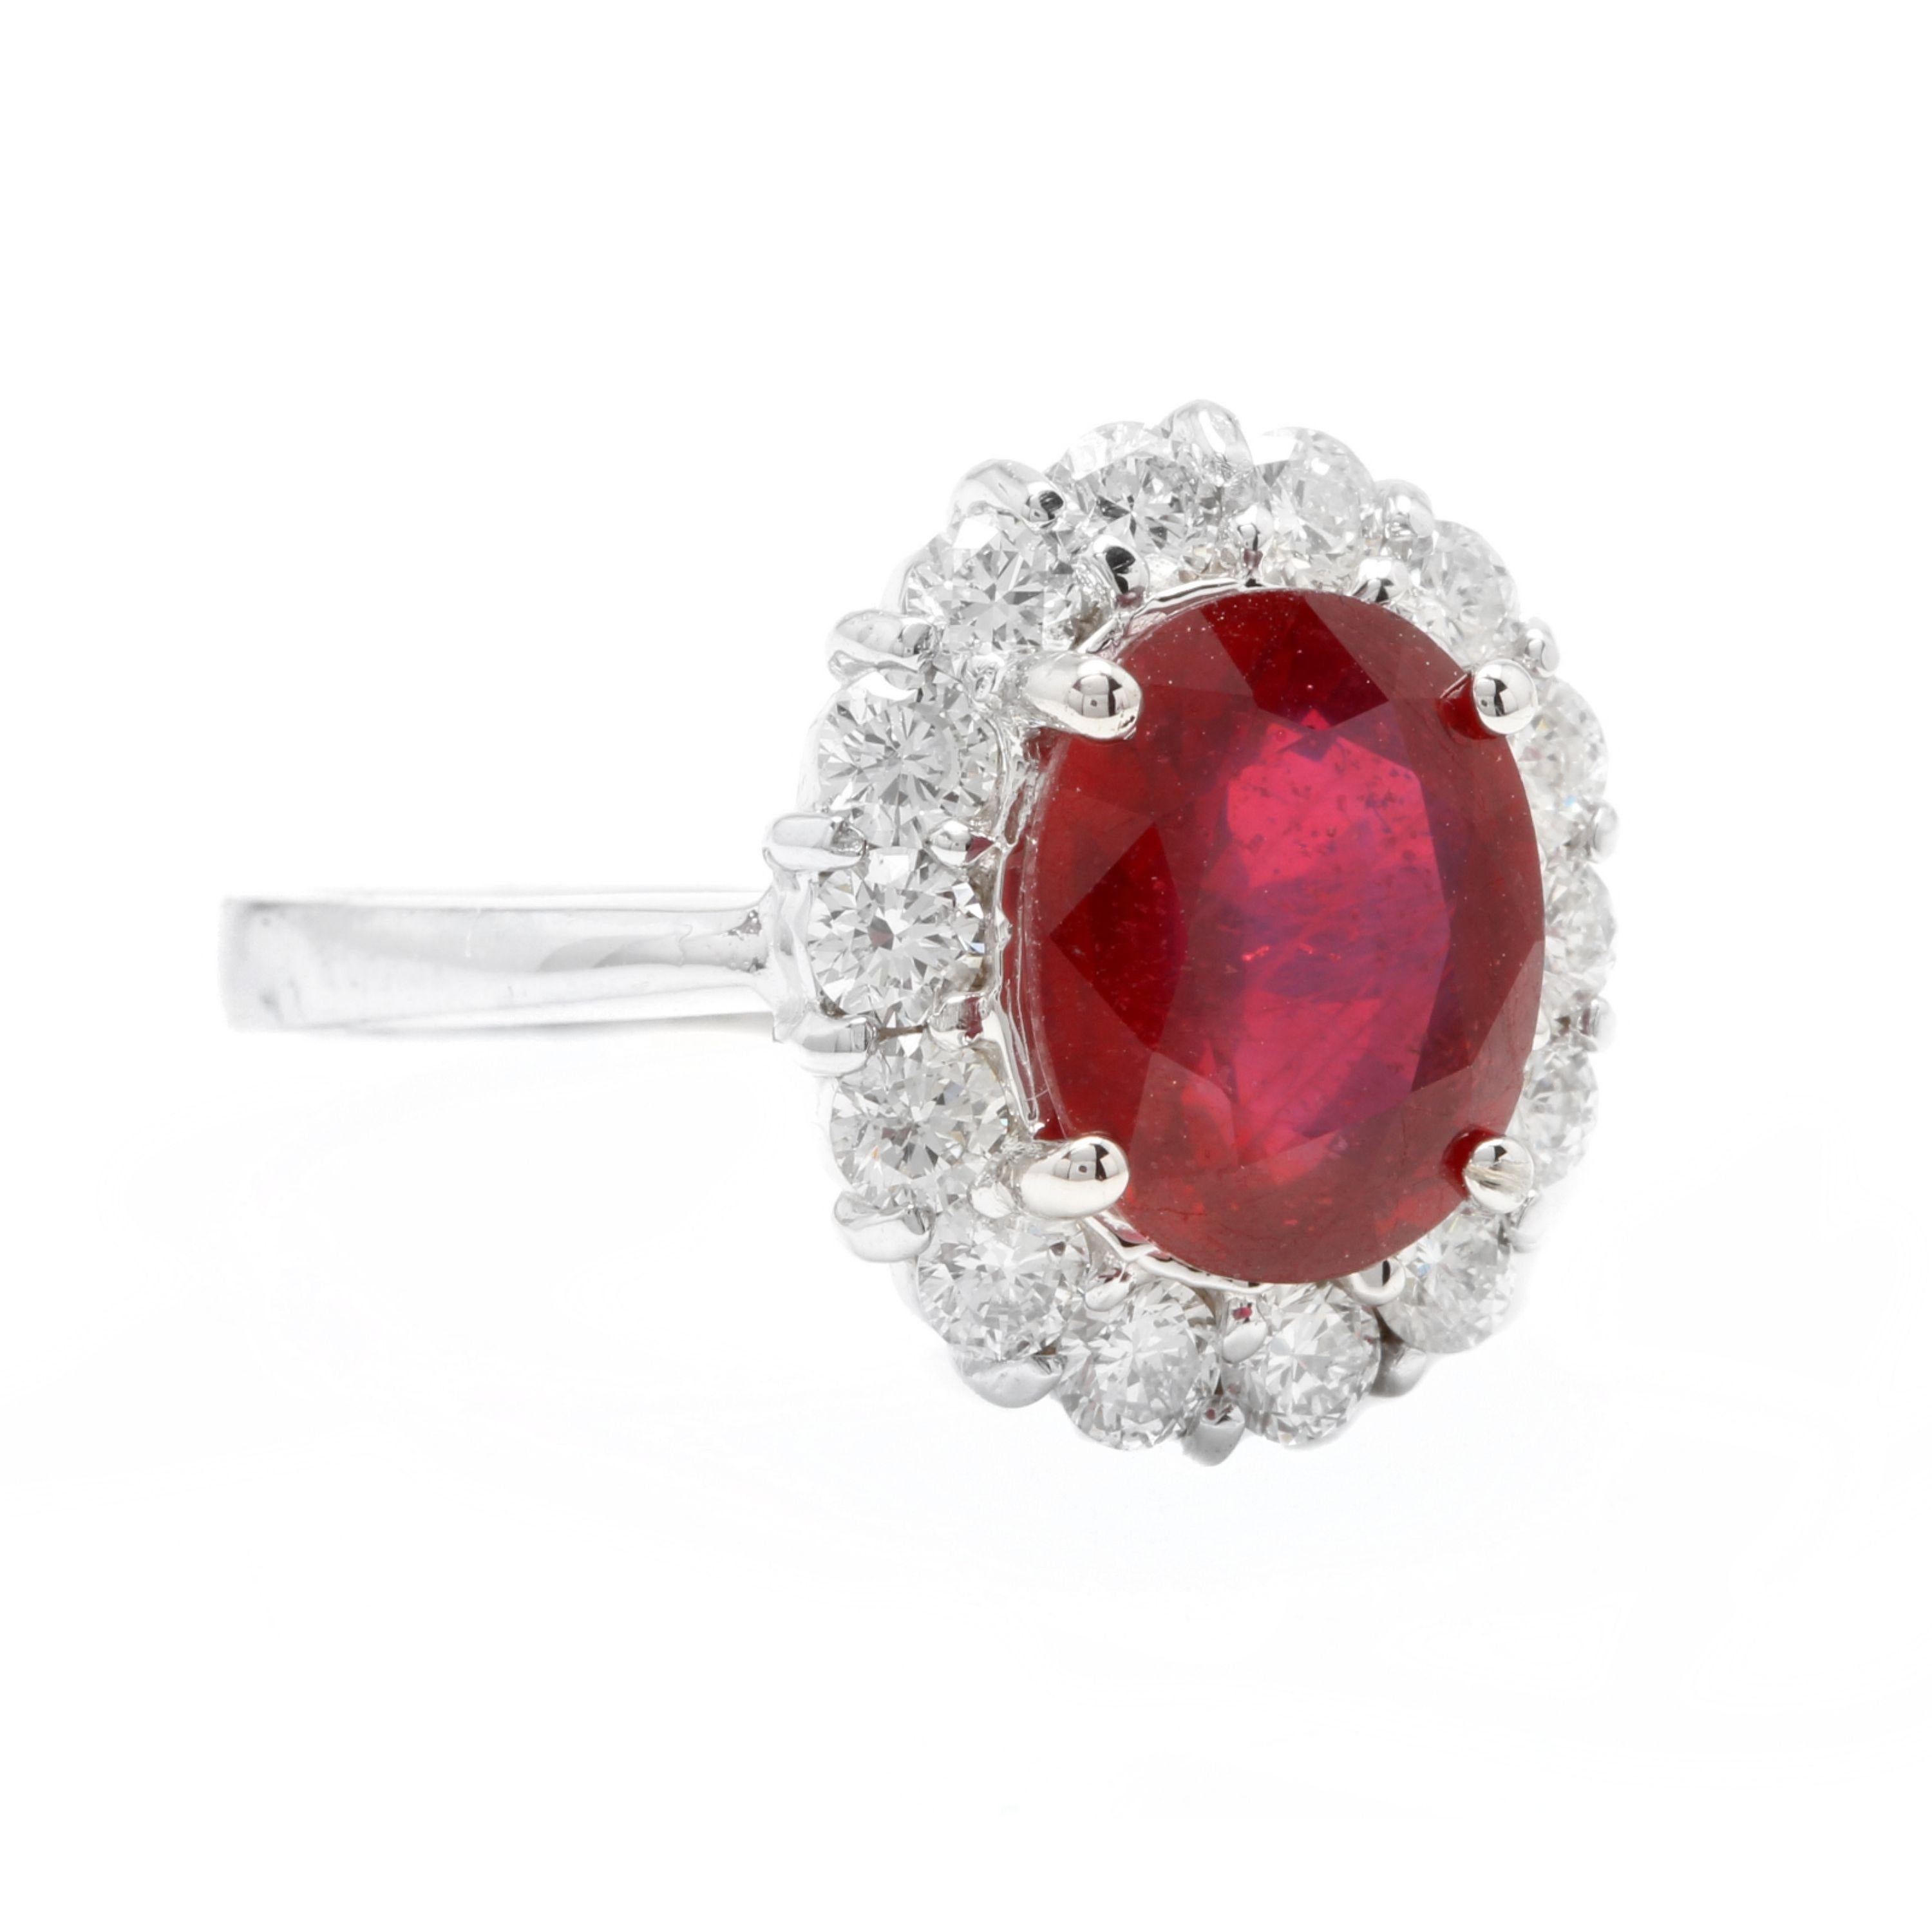 5.00 Carats Impressive Red Ruby and Natural Diamond 14K White Gold Ring

Total Red Ruby Weight is Approx. 4.00 Carats

Ruby Treatment: Lead Glass Filling

Ruby Measures: Approx. Approx. 10.00 x 8.00mm

Natural Round Diamonds Weight: Approx. 1.00